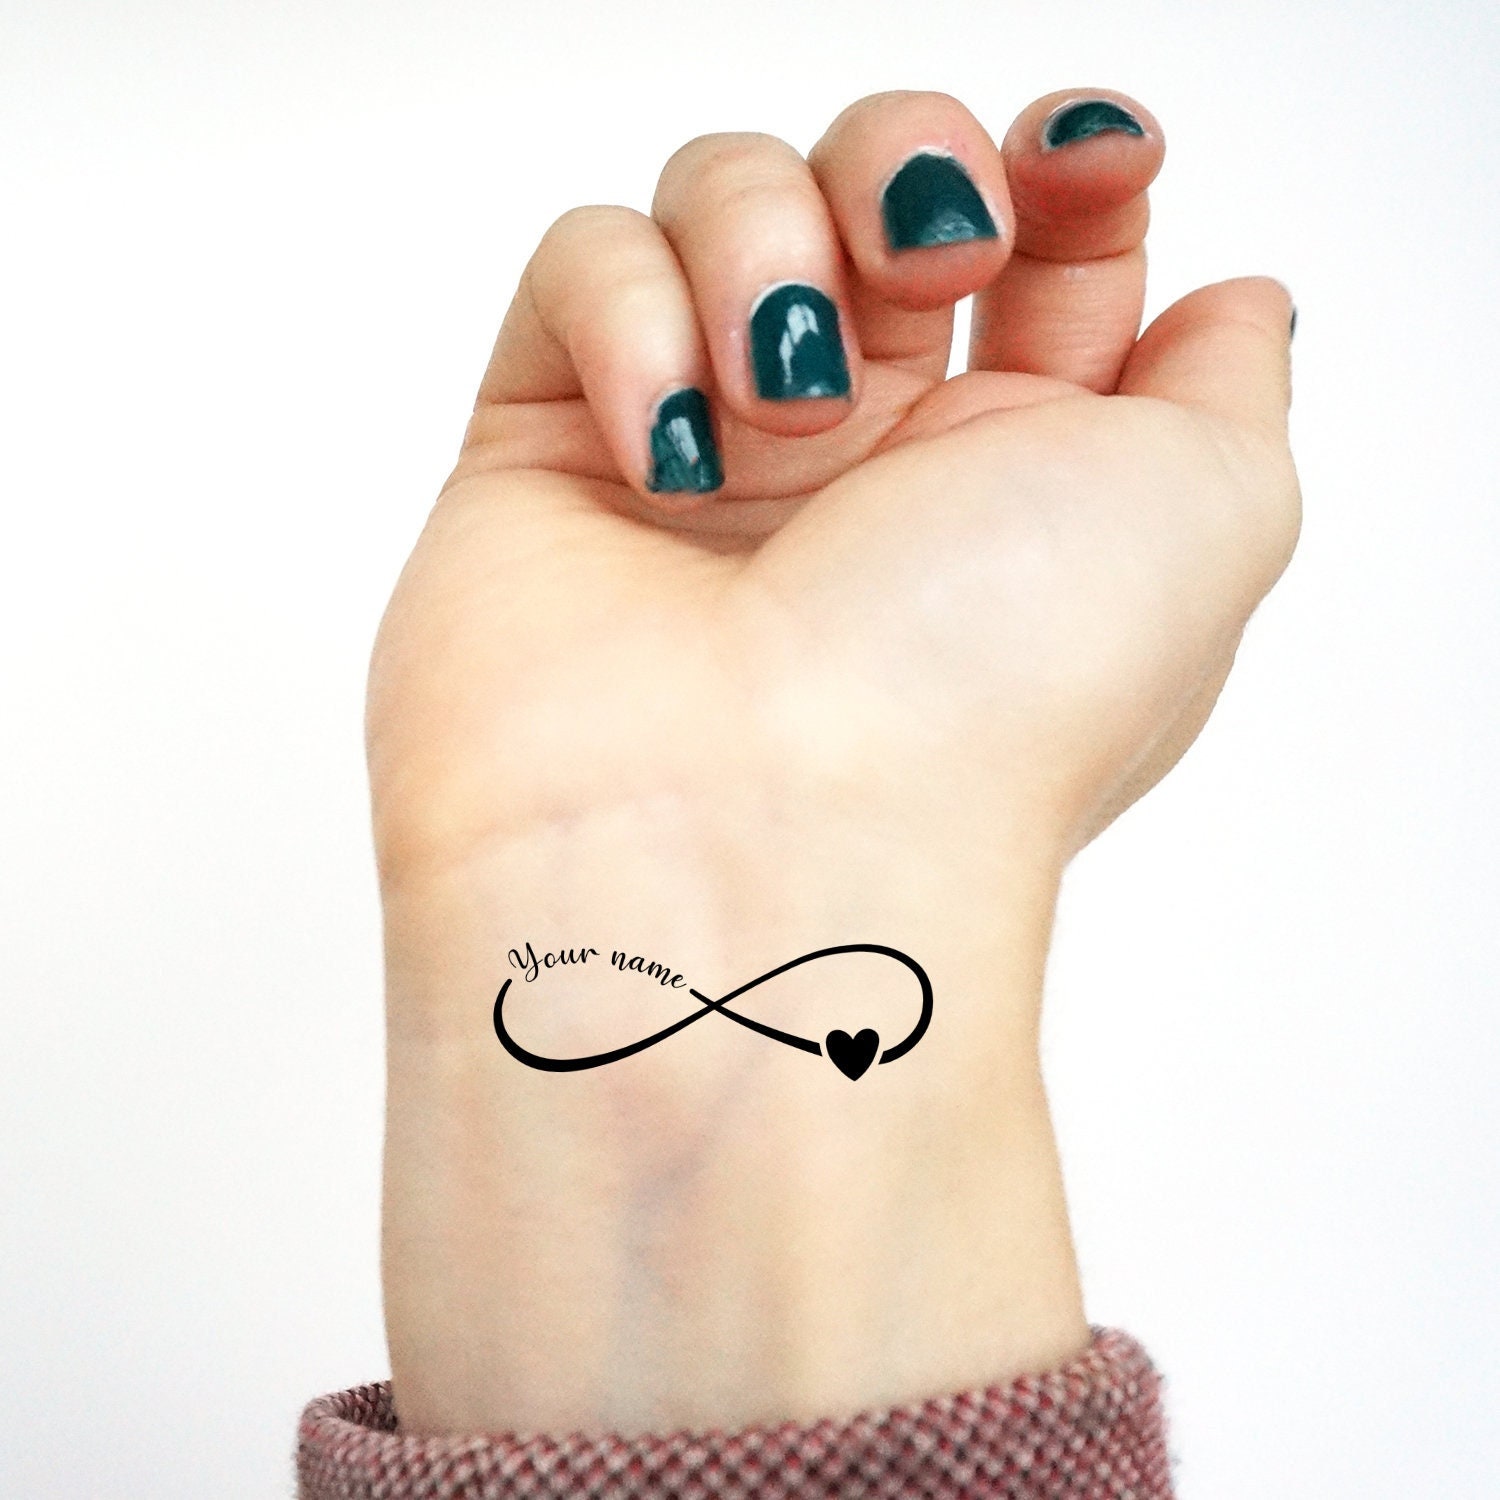 101 Best Friendship Tattoo Ideas You Have To See To Believe!